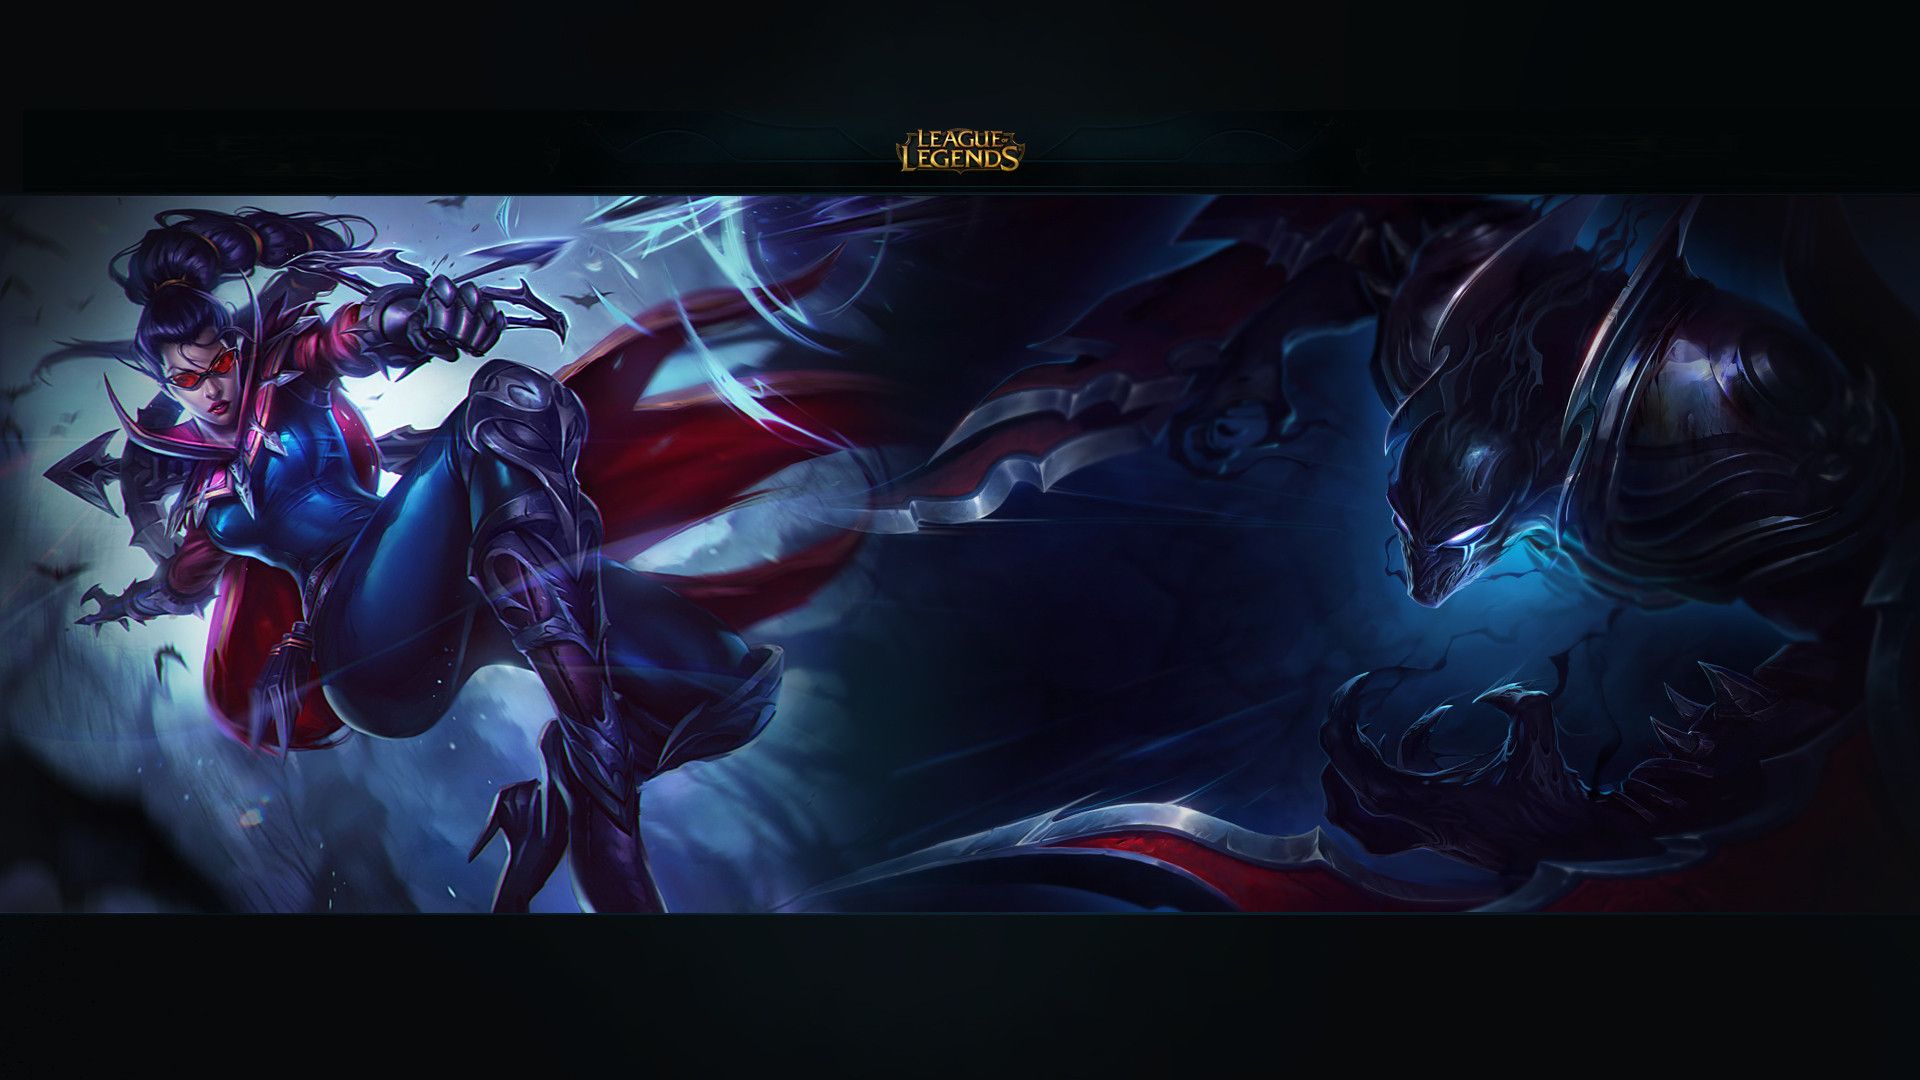 Vayne and Nocturne HD Wallpaper 1920x1080 ID46707